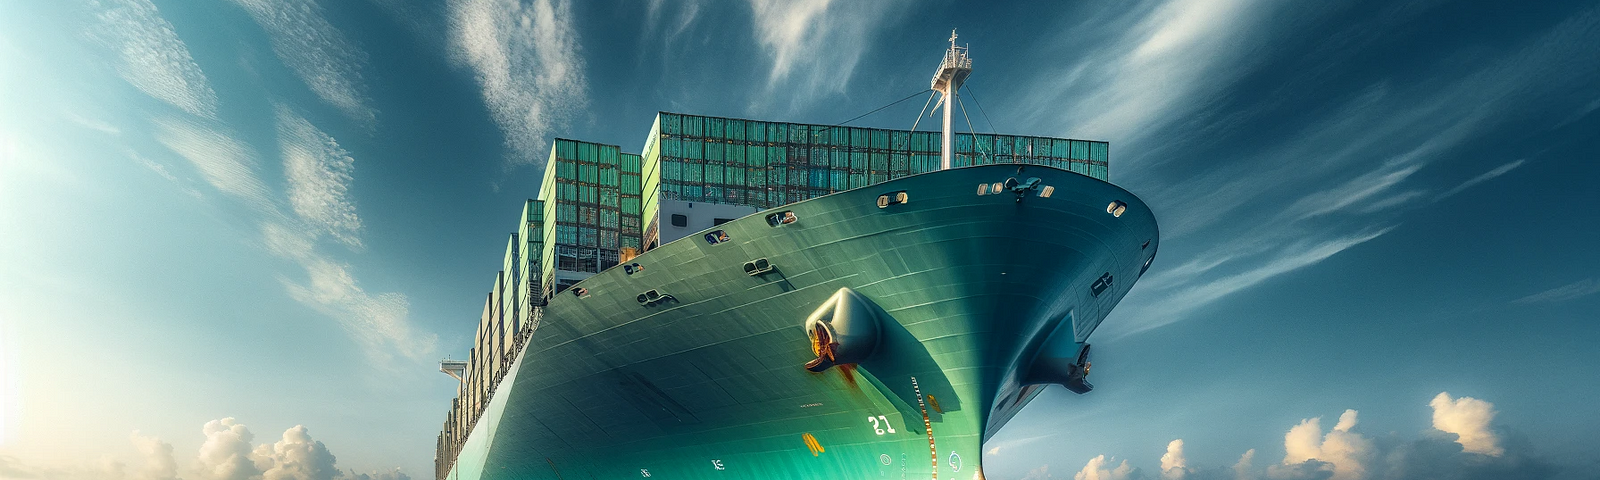 ChatGPT & DALL-E generated panoramic image of a large container ship at sea, featuring a unique paint job with the bow painted in vibrant green and the rest of the ship in traditional steel-gray.